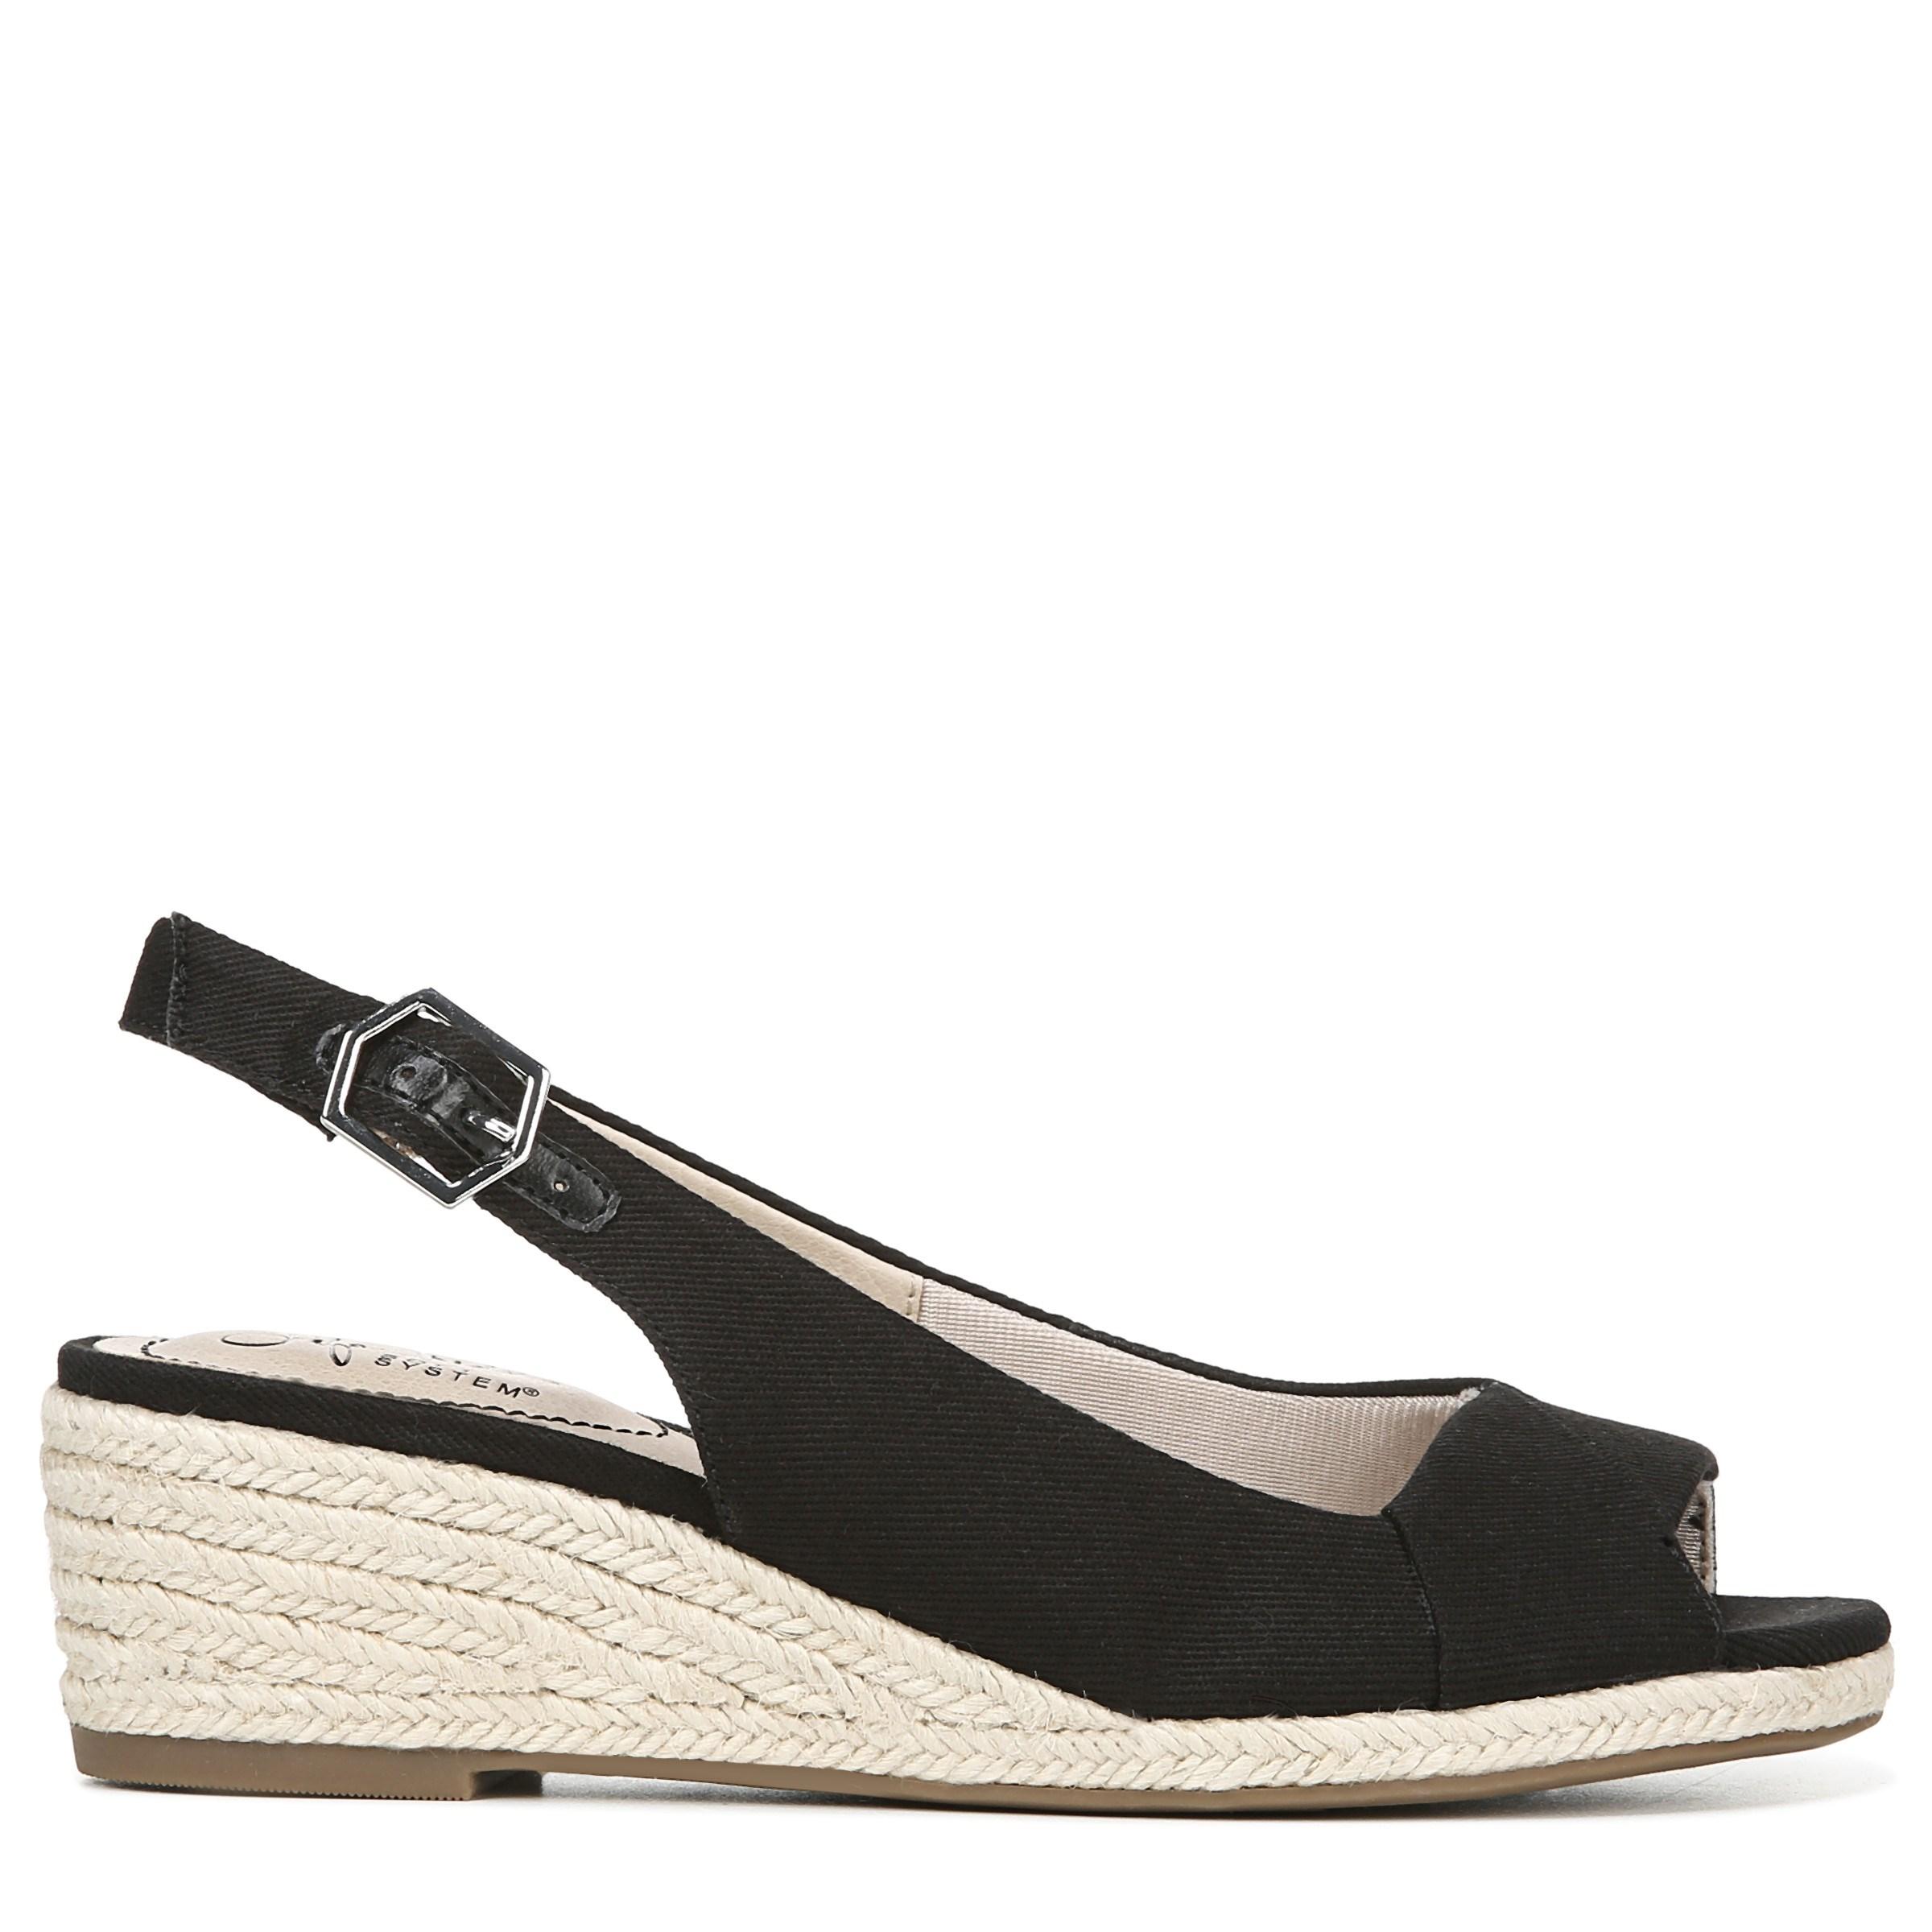 LifeStride Synthetic Socialite Espadrille Wedge Sandals in Black Save 51 Lyst